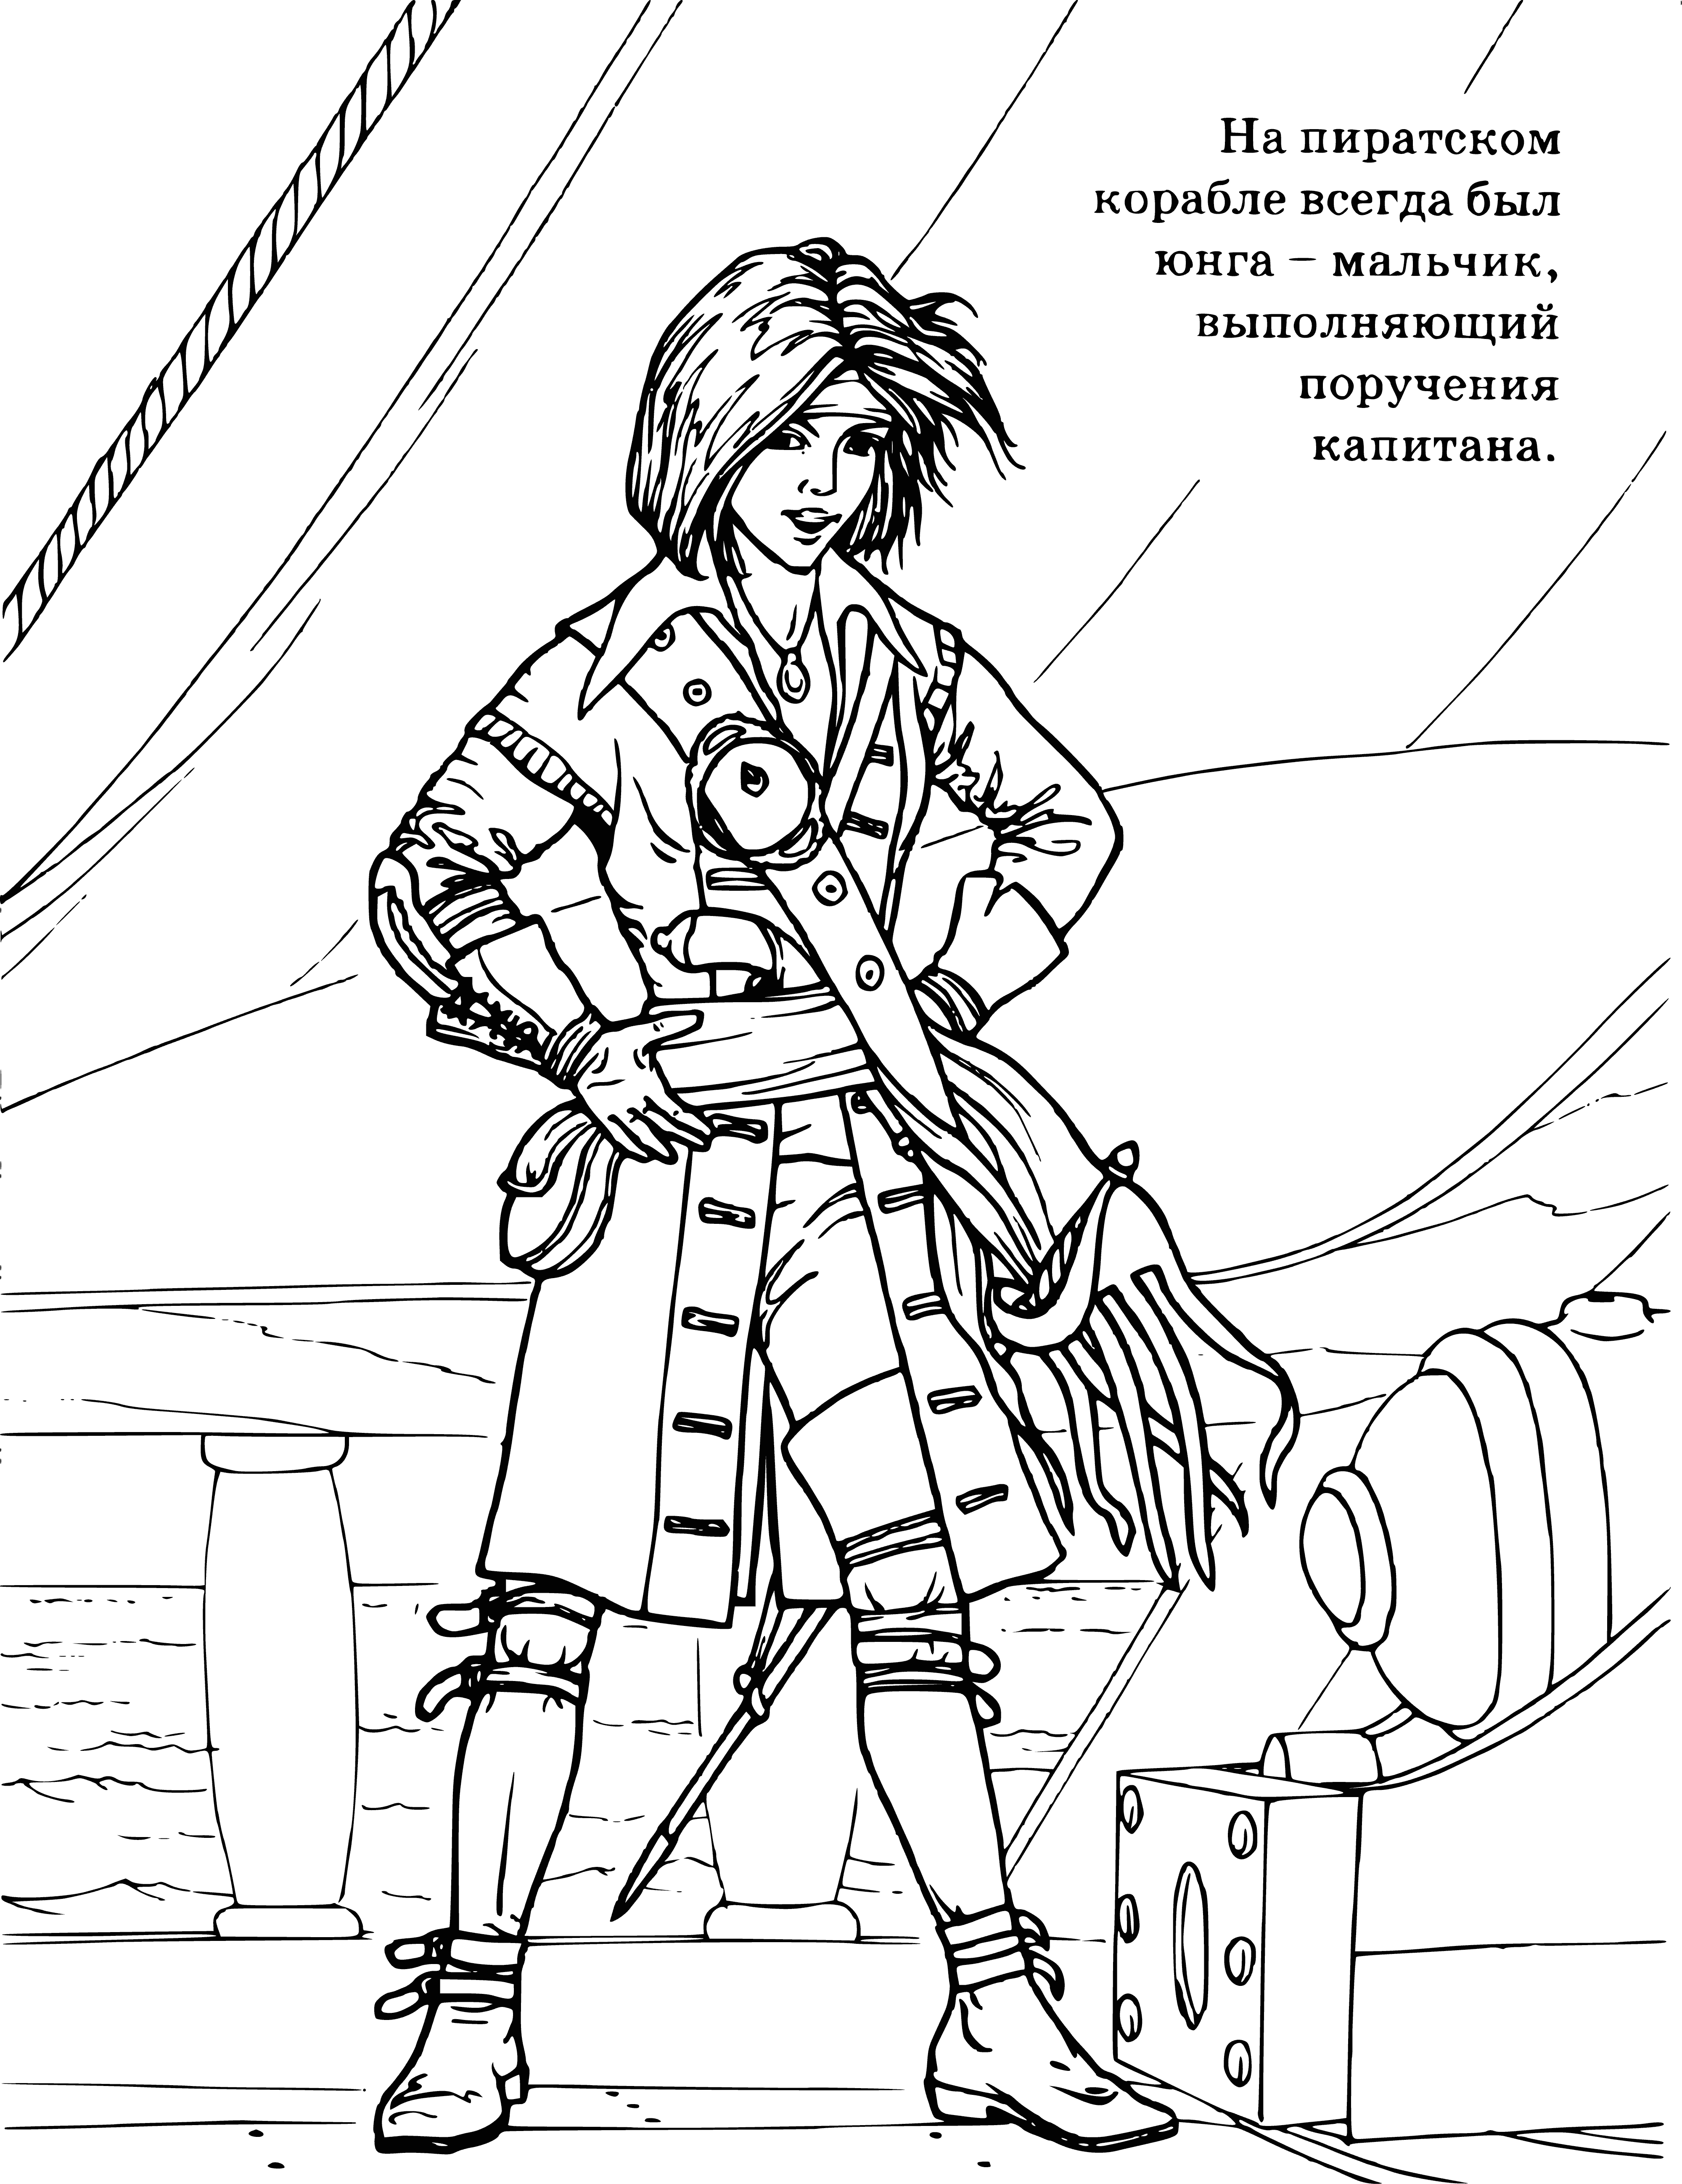 coloring page: A young boy stands on a pirate ship, wearing a ragged outfit, tired and scared. He is no older than 12.